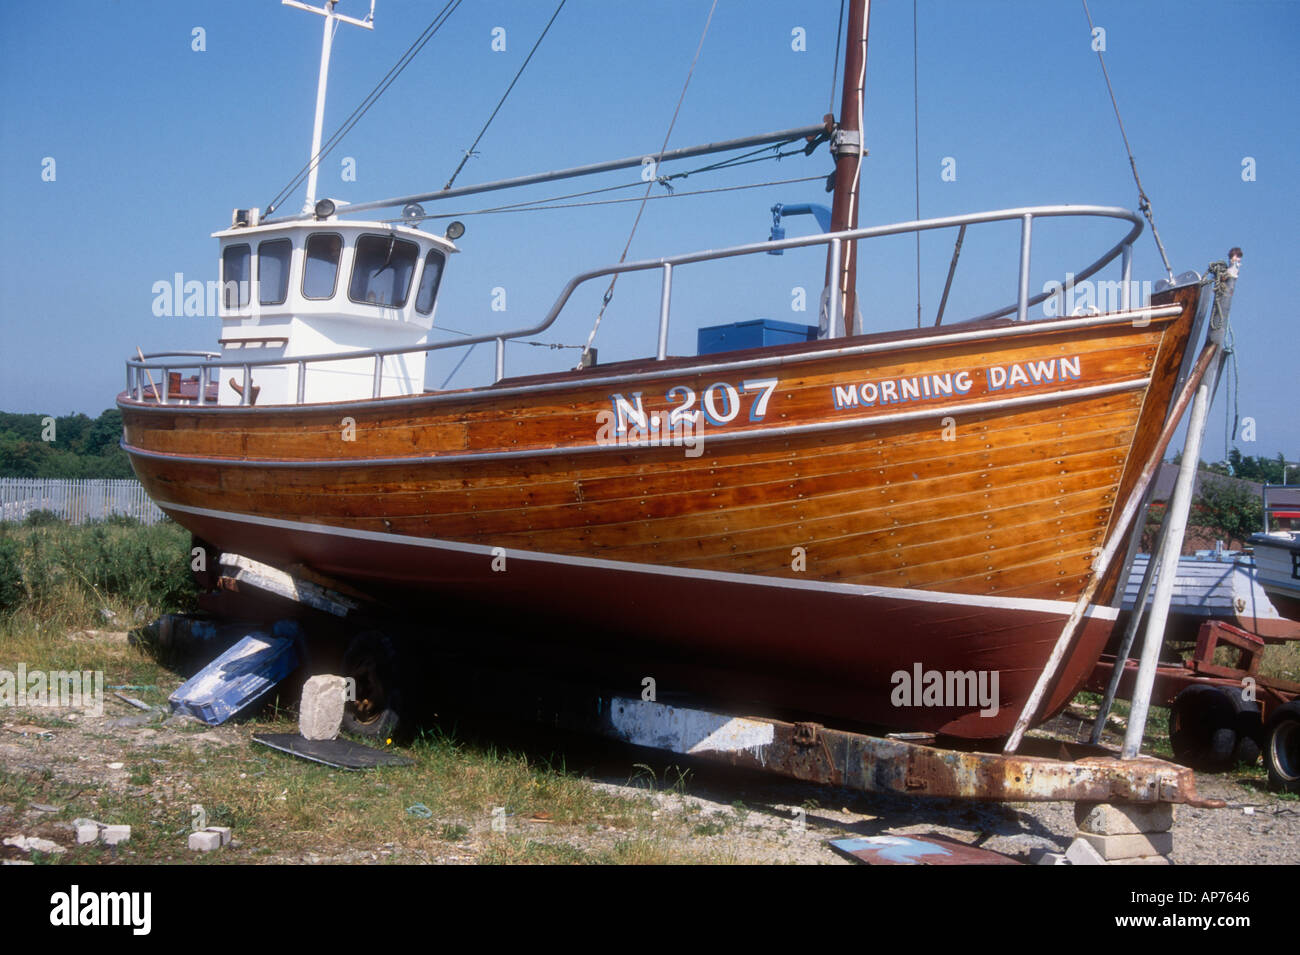 The carvel constructed wooden fishing boat Morning Dawn at ...